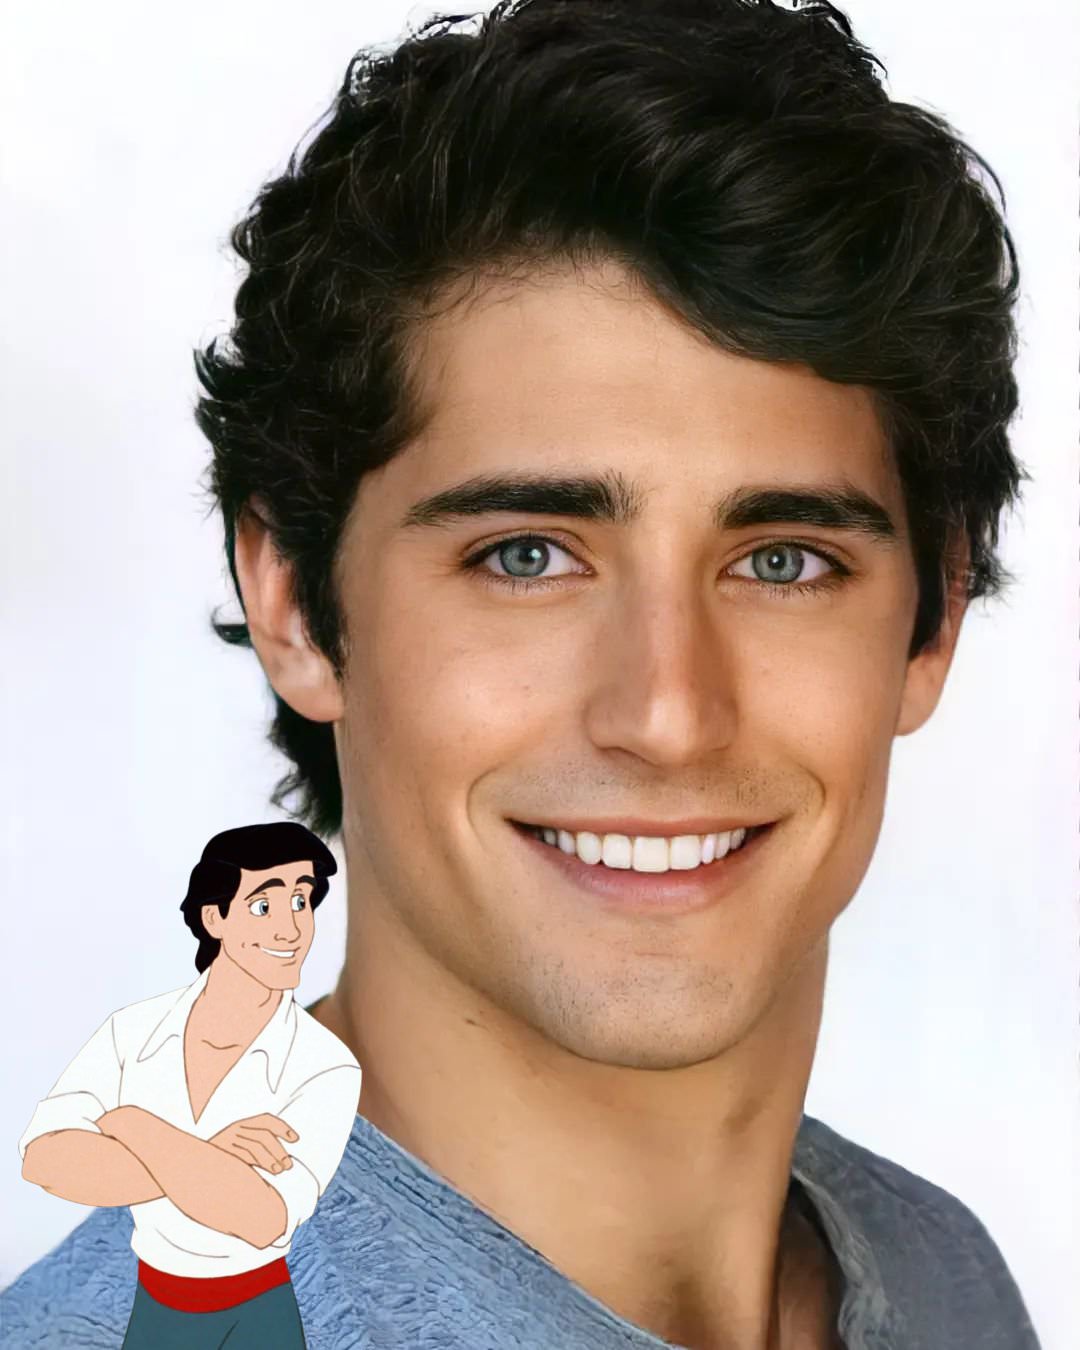 cartoon characters rendered by AI - Prince Eric